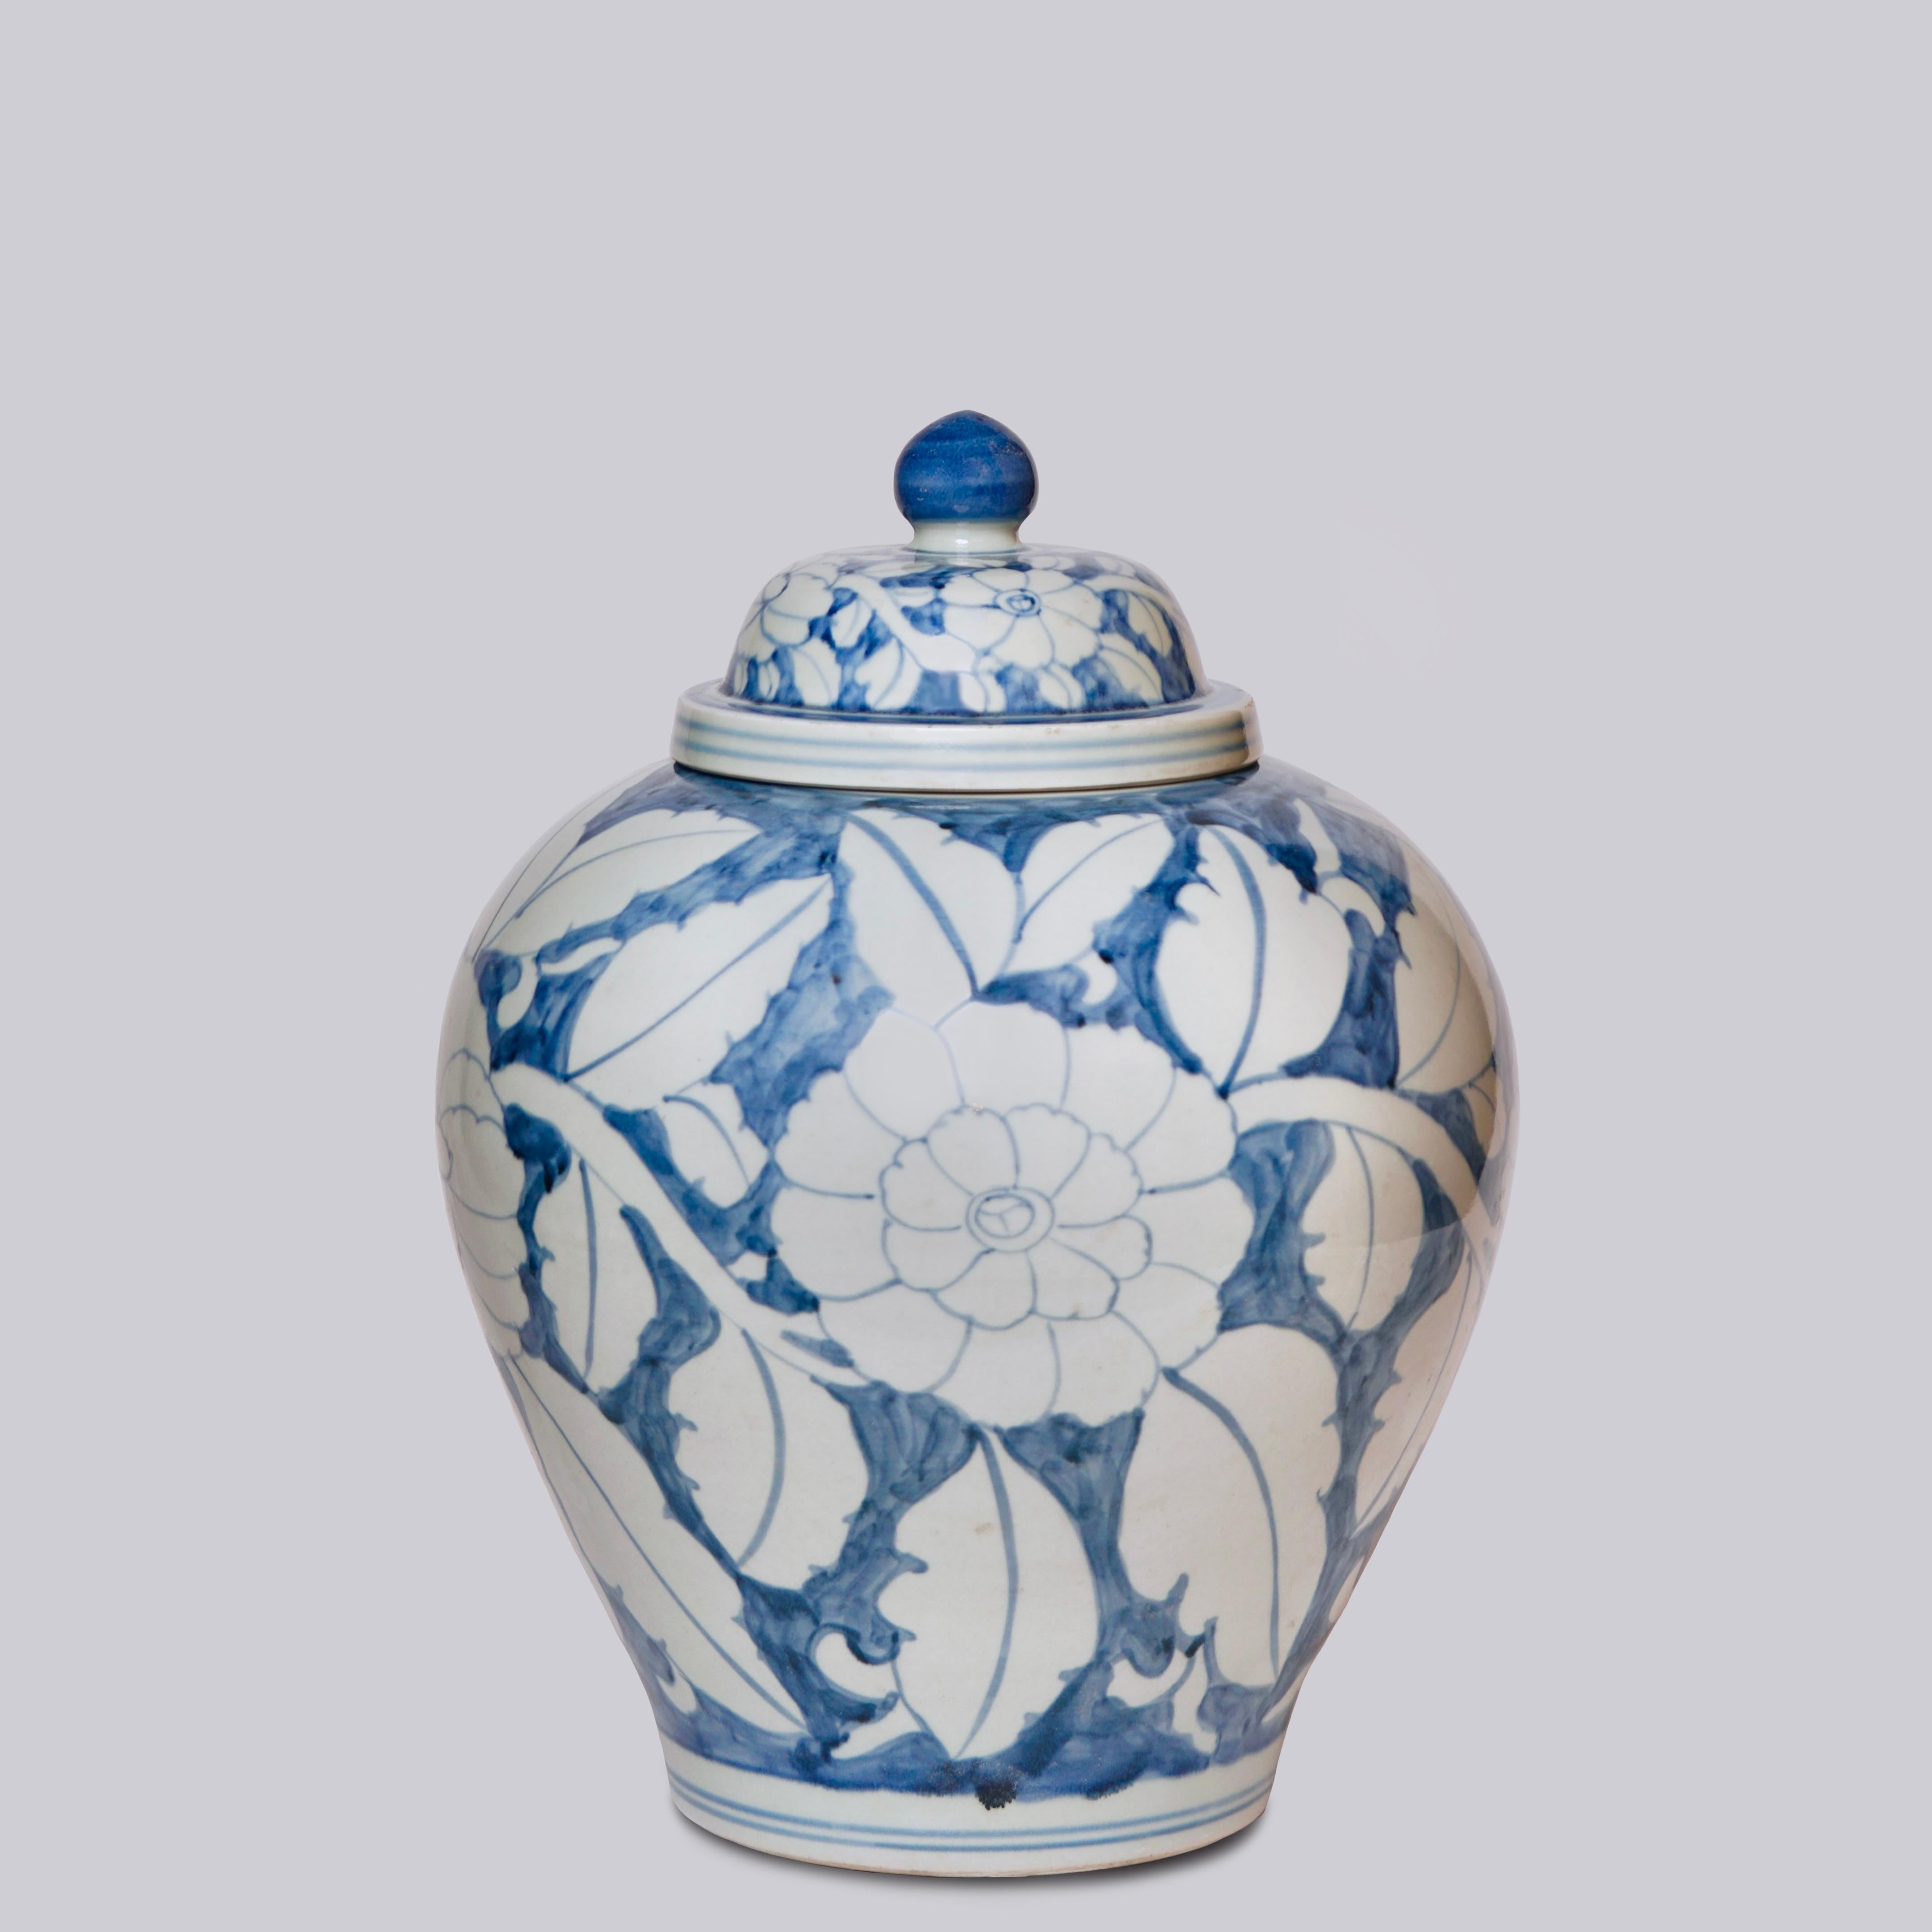 This temple jar is a traditional porcelain vessel from Jingdezhen, a town long distinguished by imperial patronage. The rustic finish porcelain body has been painted with a lively freehand peony pattern.  This temple jar echoes the exuberant